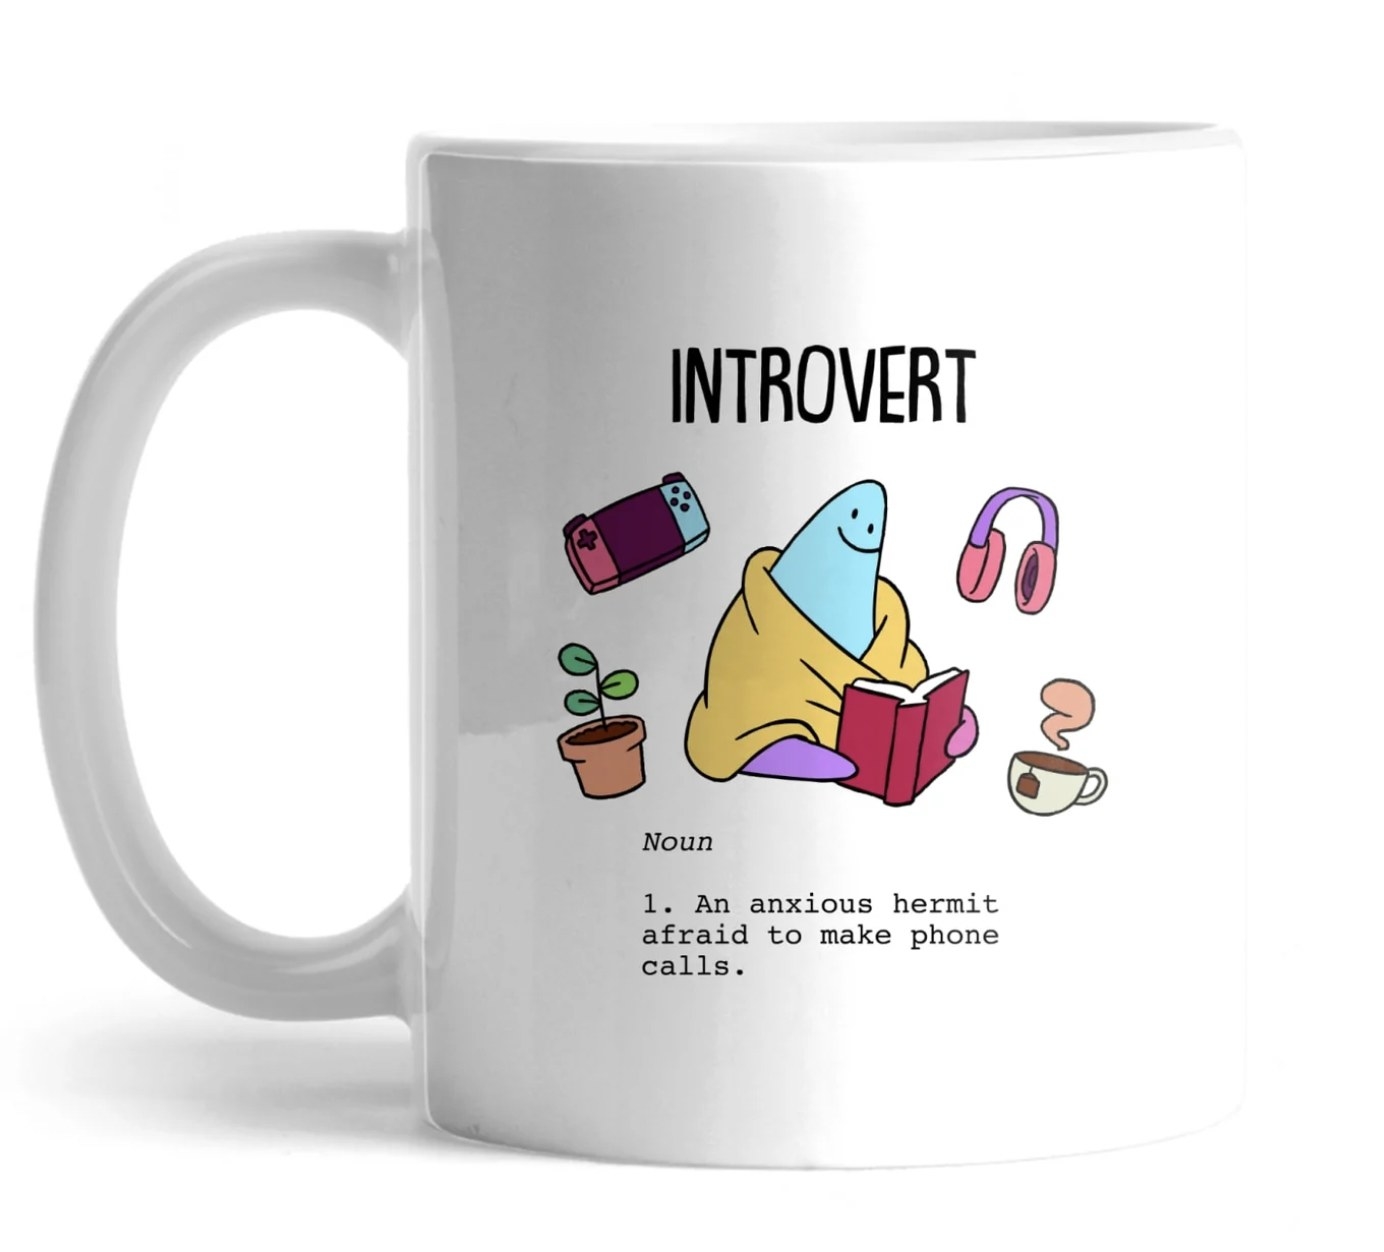 the mug with introvert design reading &quot;noun 1. an anxious hermit afraid to make phone calls.&quot;